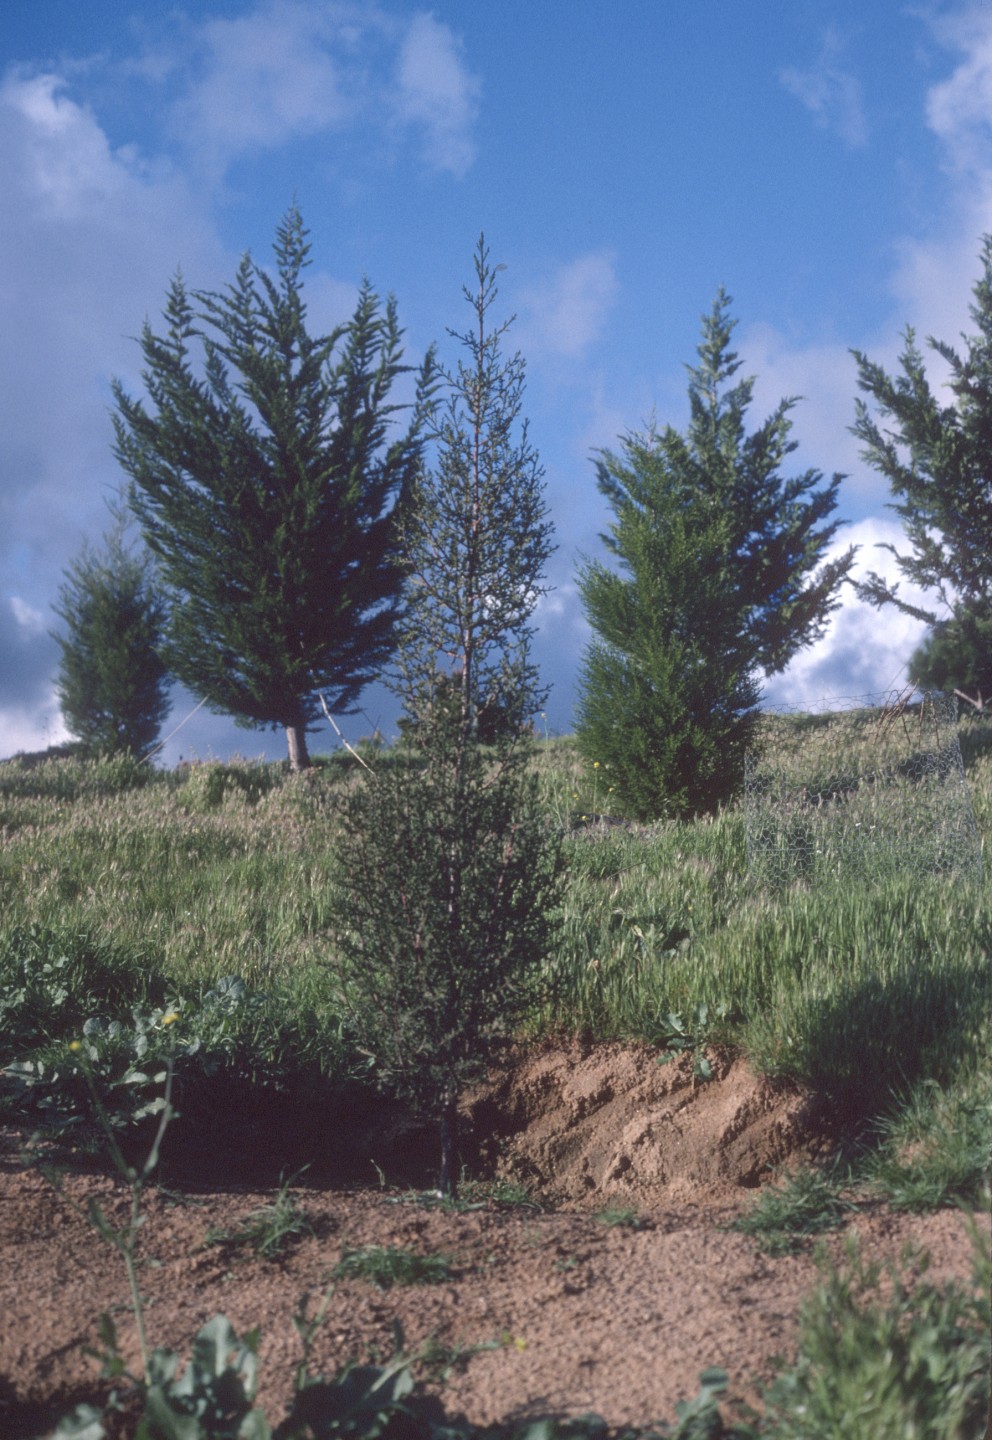 The desert cypress (foreground) was donated by Mr. and Mrs. Kenneth Taylor. They grew it from seed sent to them by a friend in Morocco, and came to the Wild Animal Park to plant it in the arboretum. There were less than 24 specimens of this tree species in the world in 1979, and this young tree in the arboretum was the rarest living thing at the Wild Animal Park at the time.